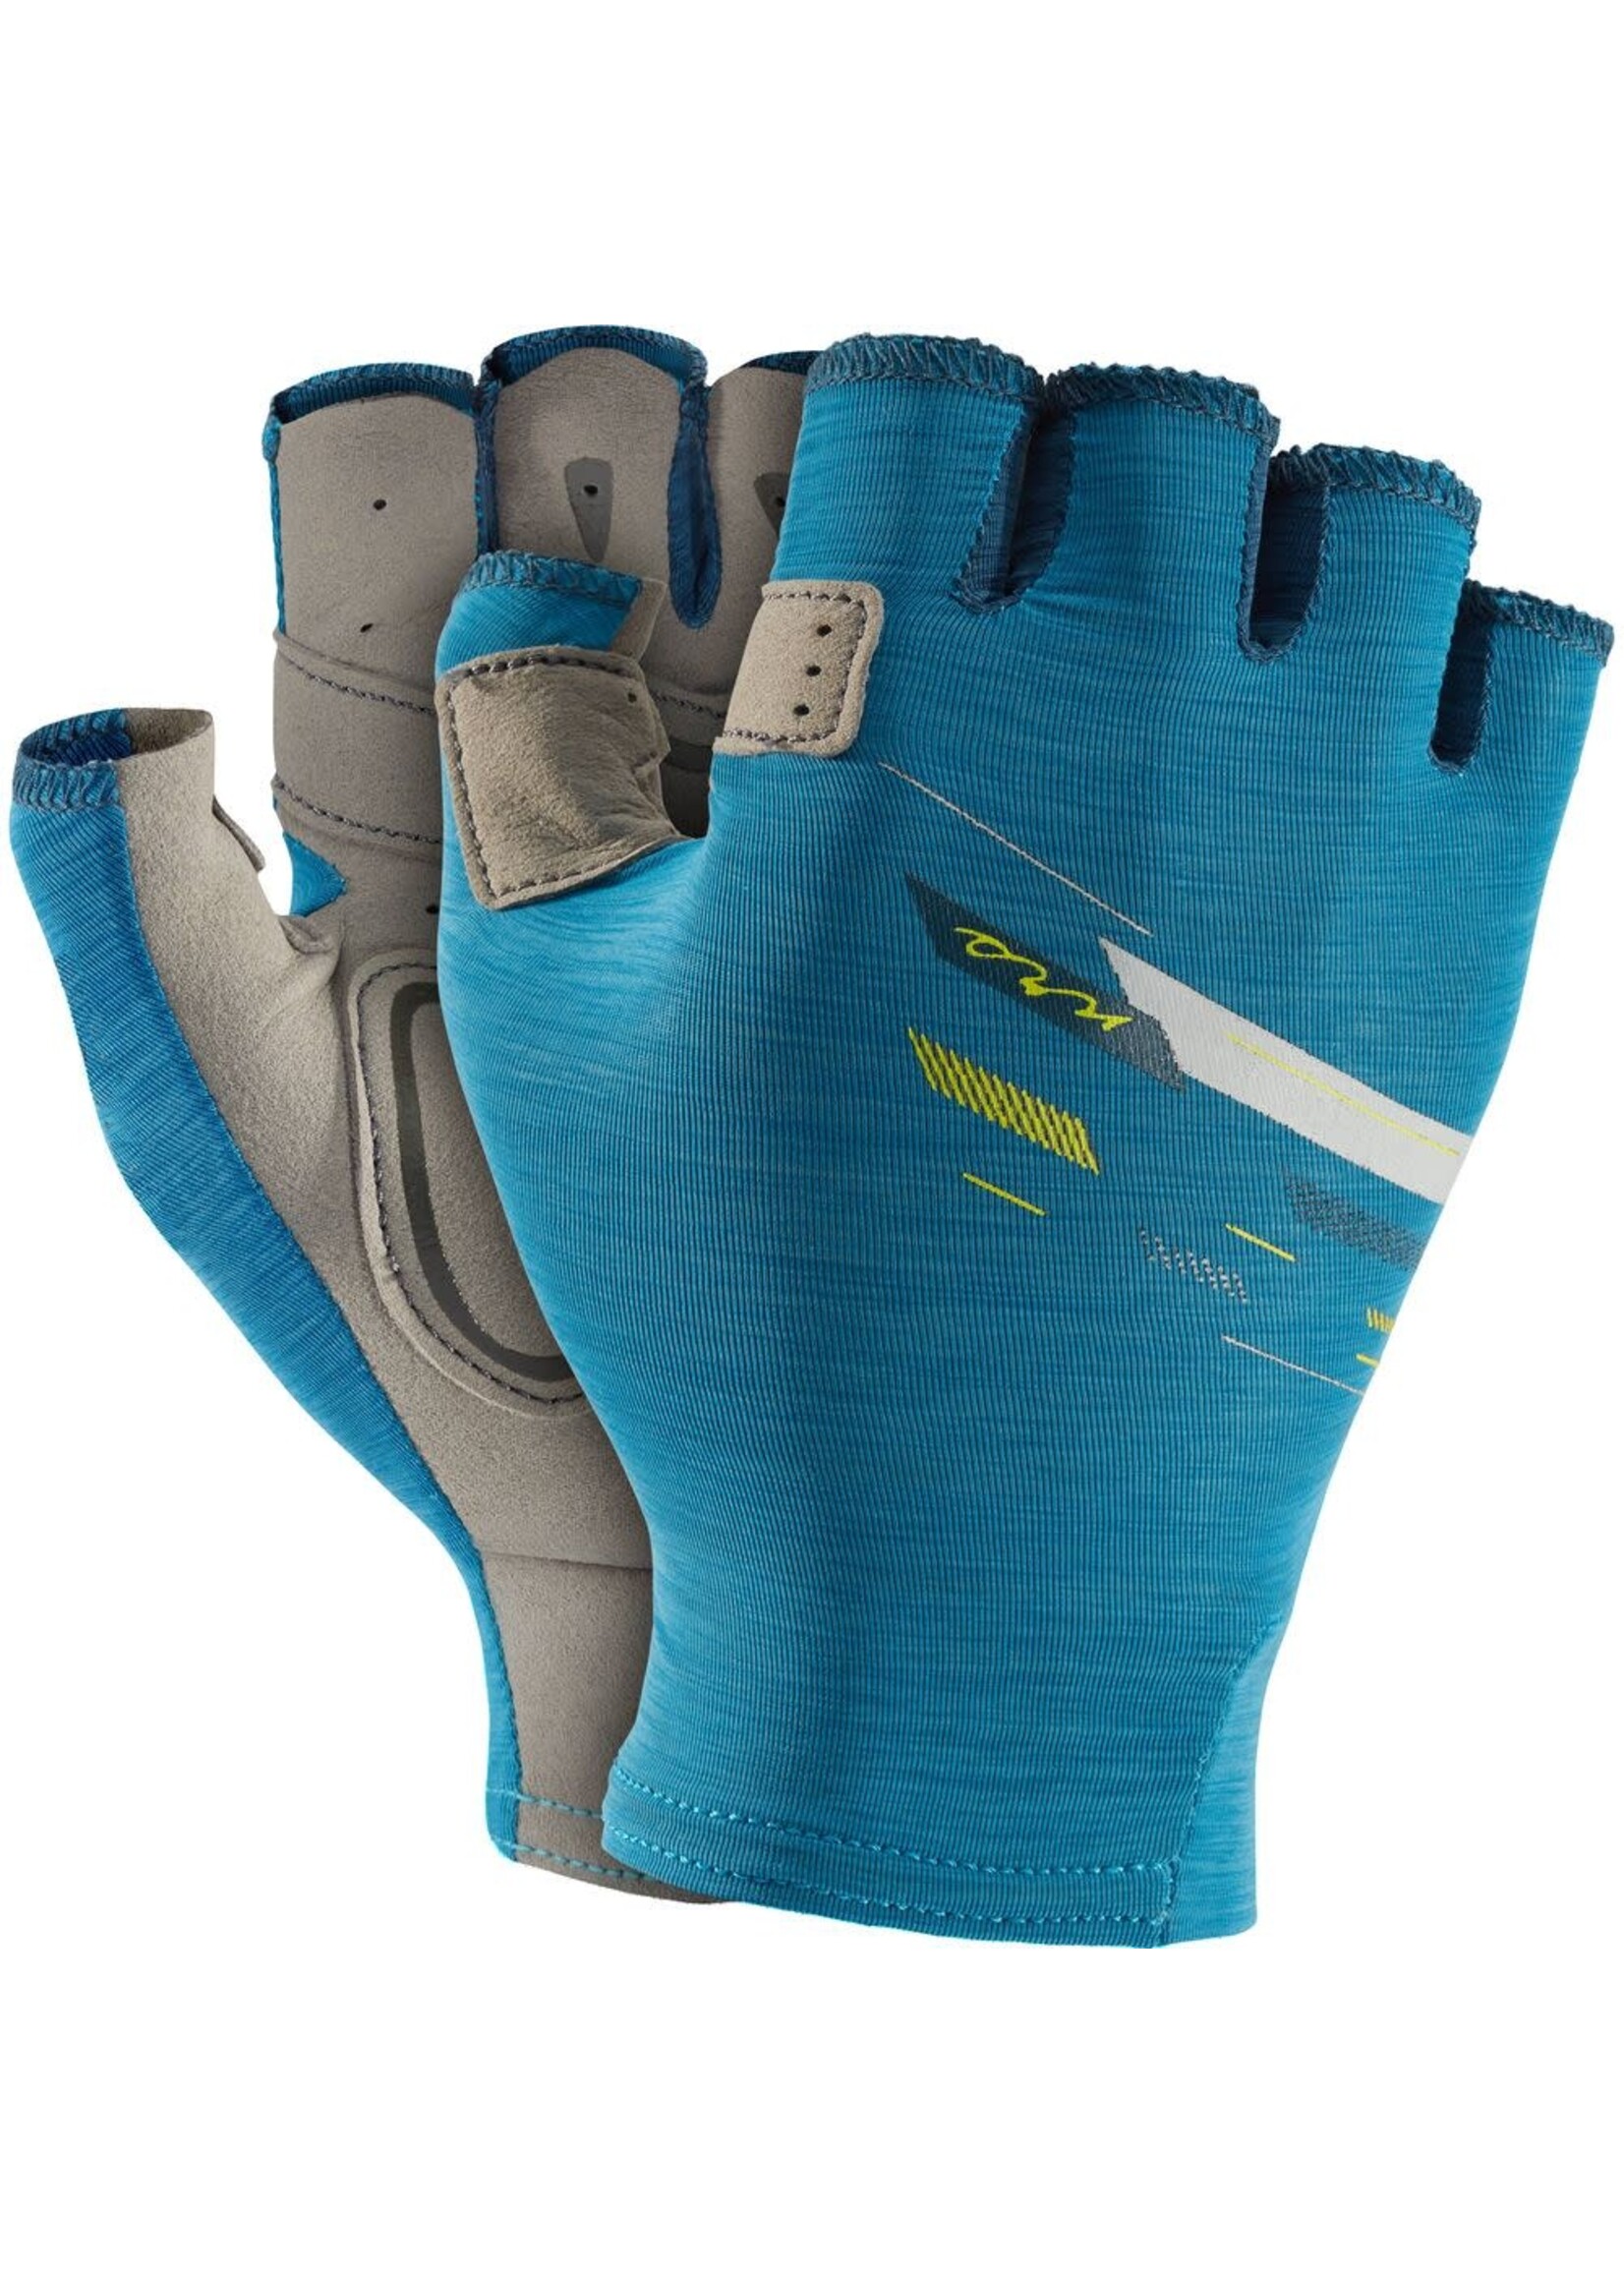 NRS NRS Womens Boater's Glove Fjord- L